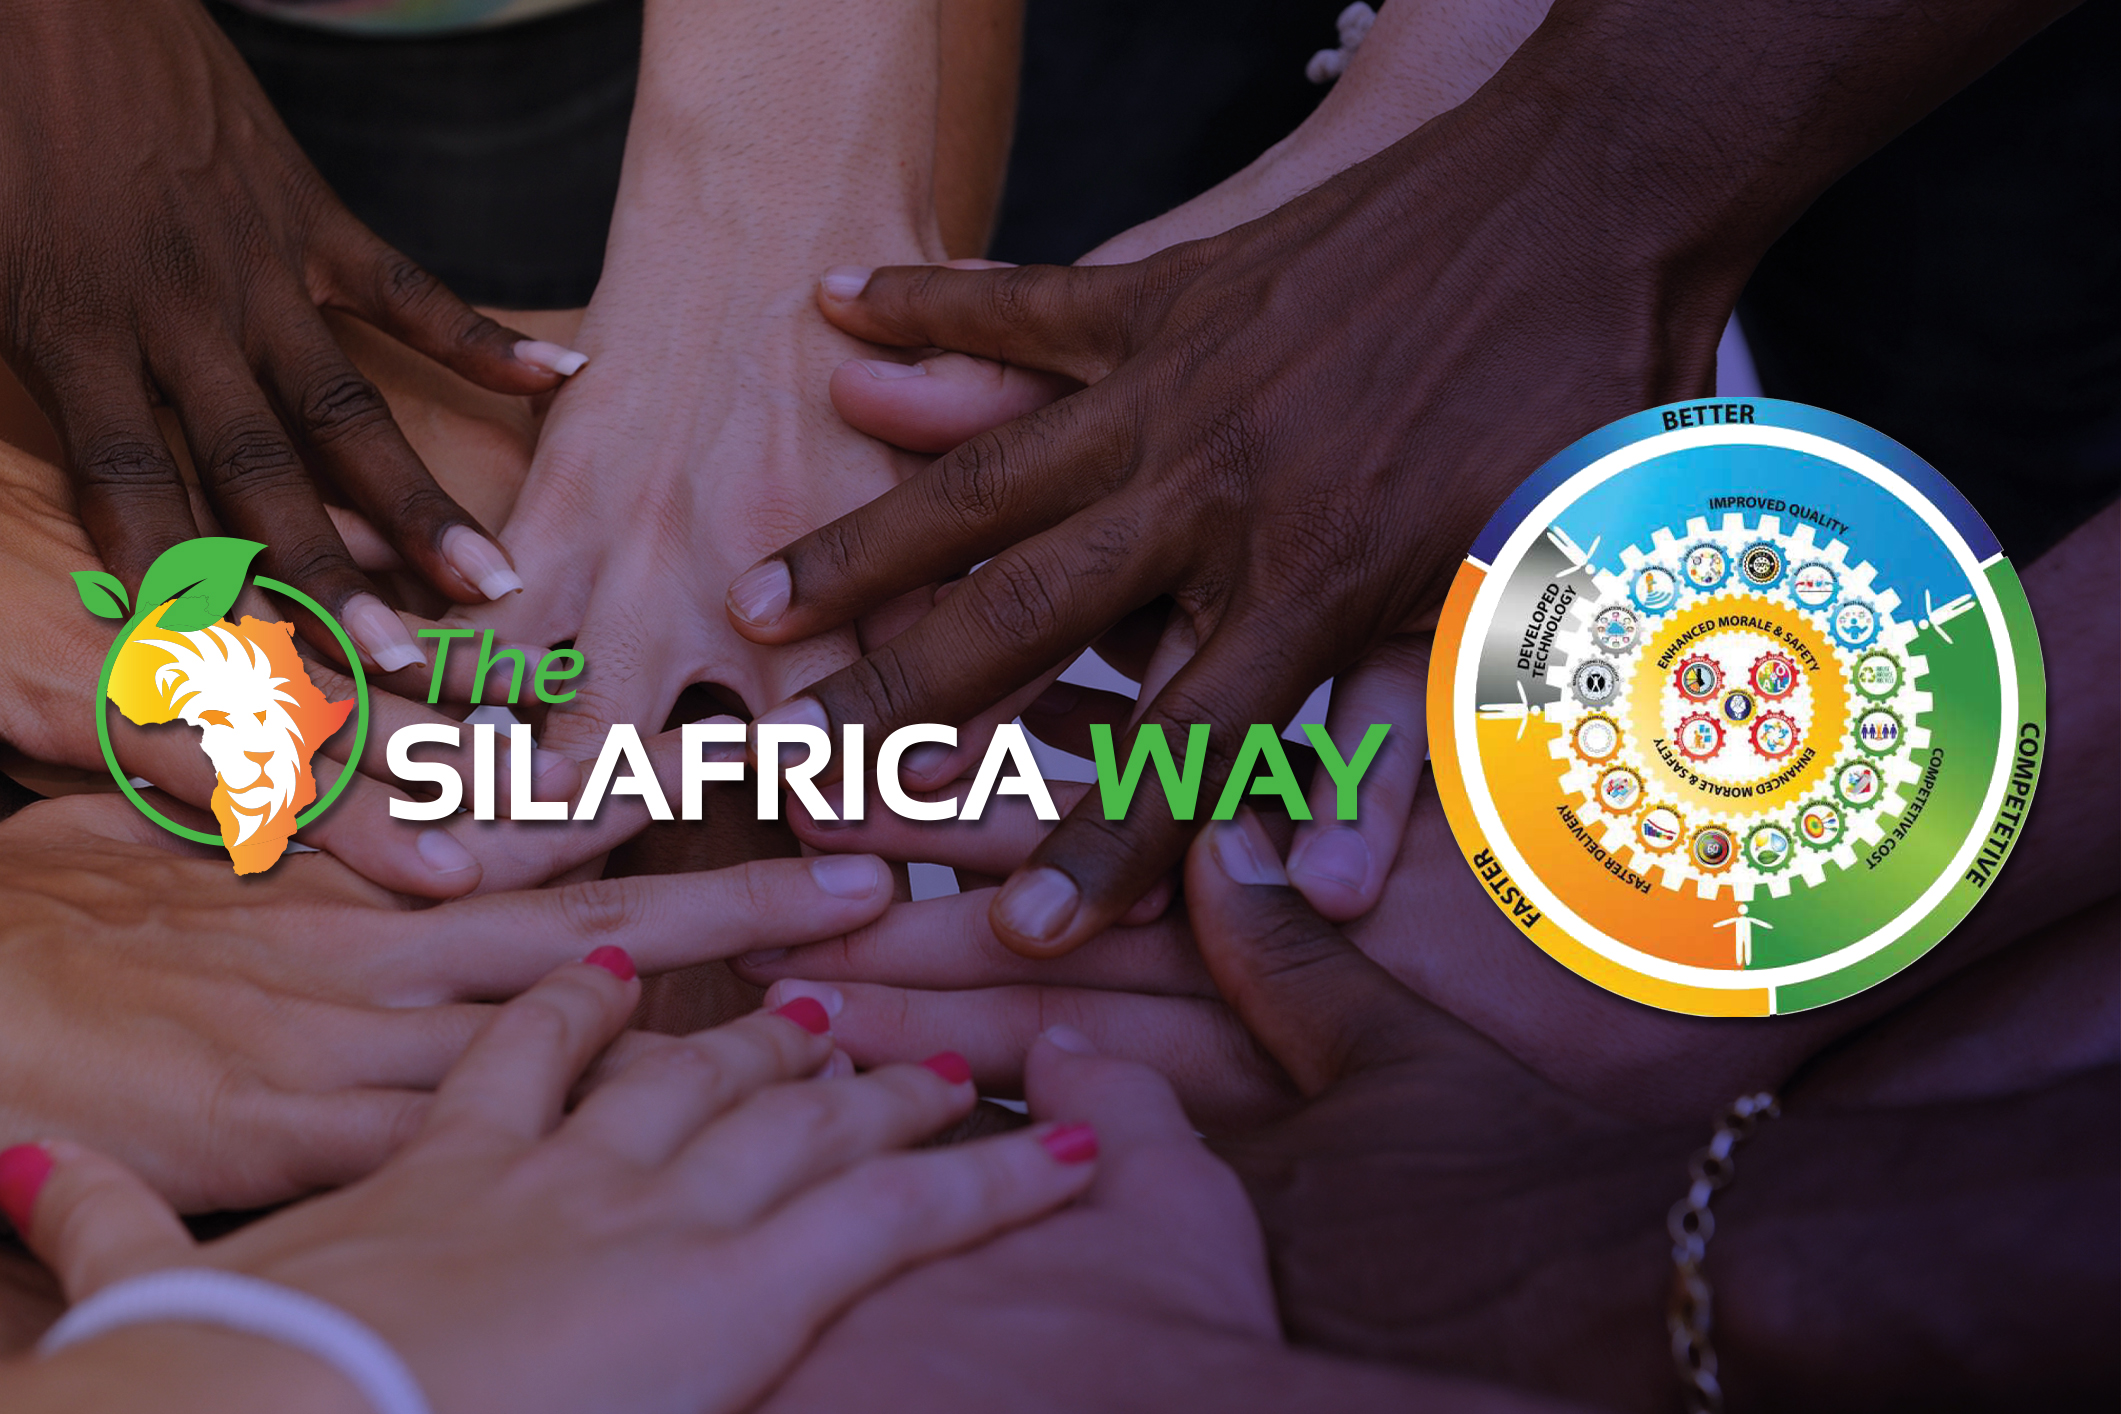 The guiding principles and core values of “The Silafrica Way” empower every Silafrica employee to have a positive and sustainable impact on the company, society, and the environment.